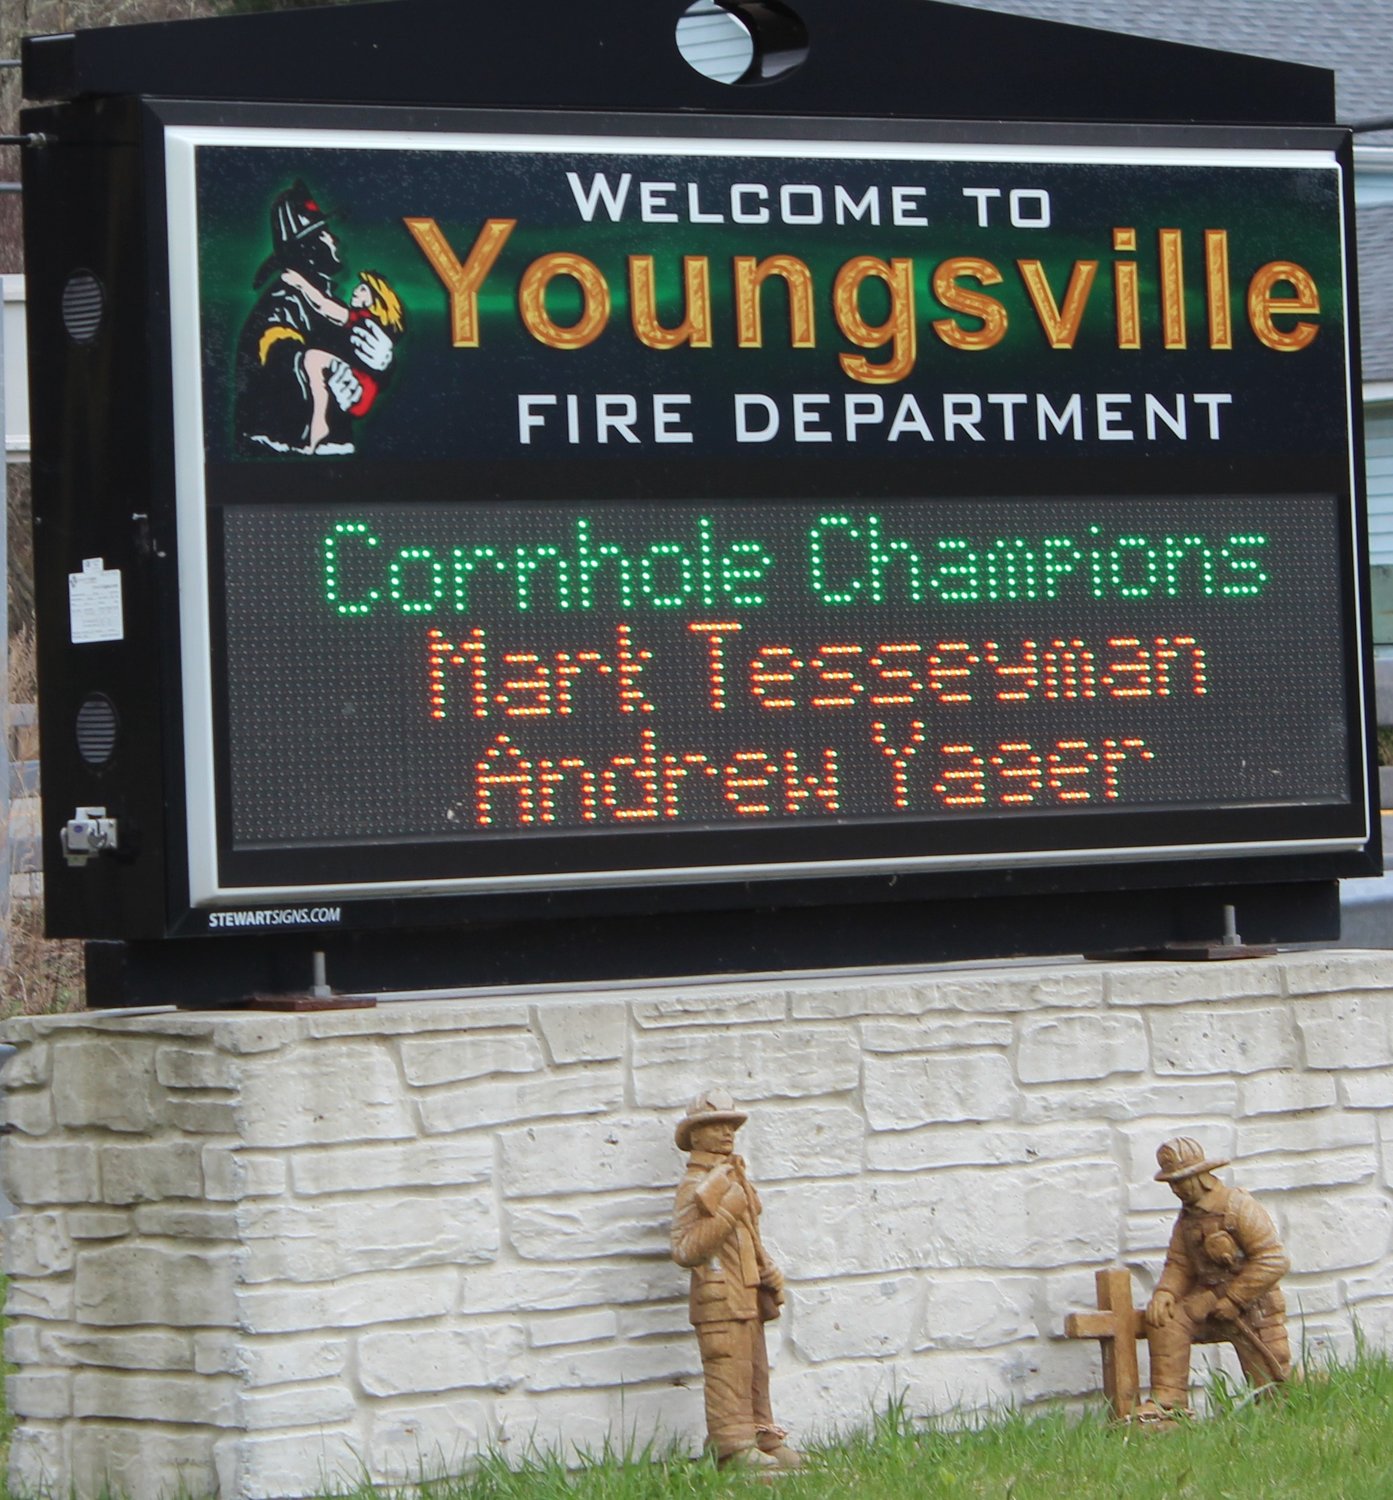 No sooner had the official winners of the Youngsville Fire Department Cornhole Classic been announced,  the champions’ names were flashing on the outdoor department bulletin board located near Route 52.